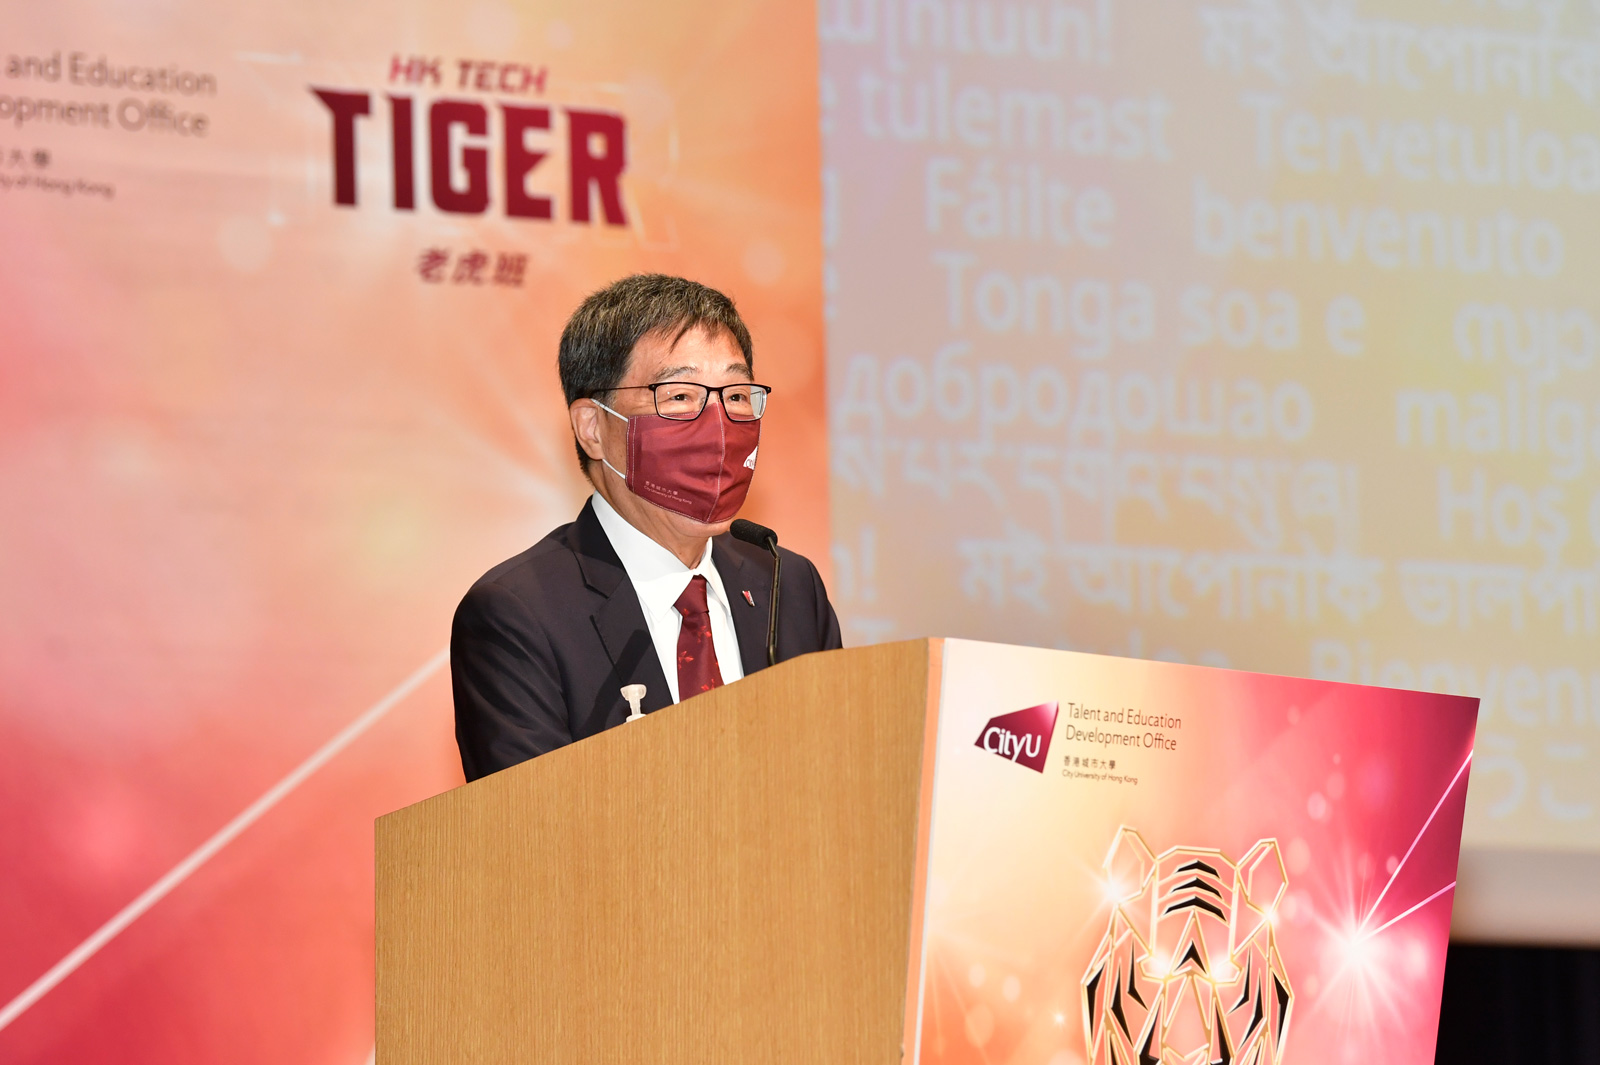 President Kuo tells the HK TECH Tiger students that the programme will help them attain their career goals and aspirations for further studies.